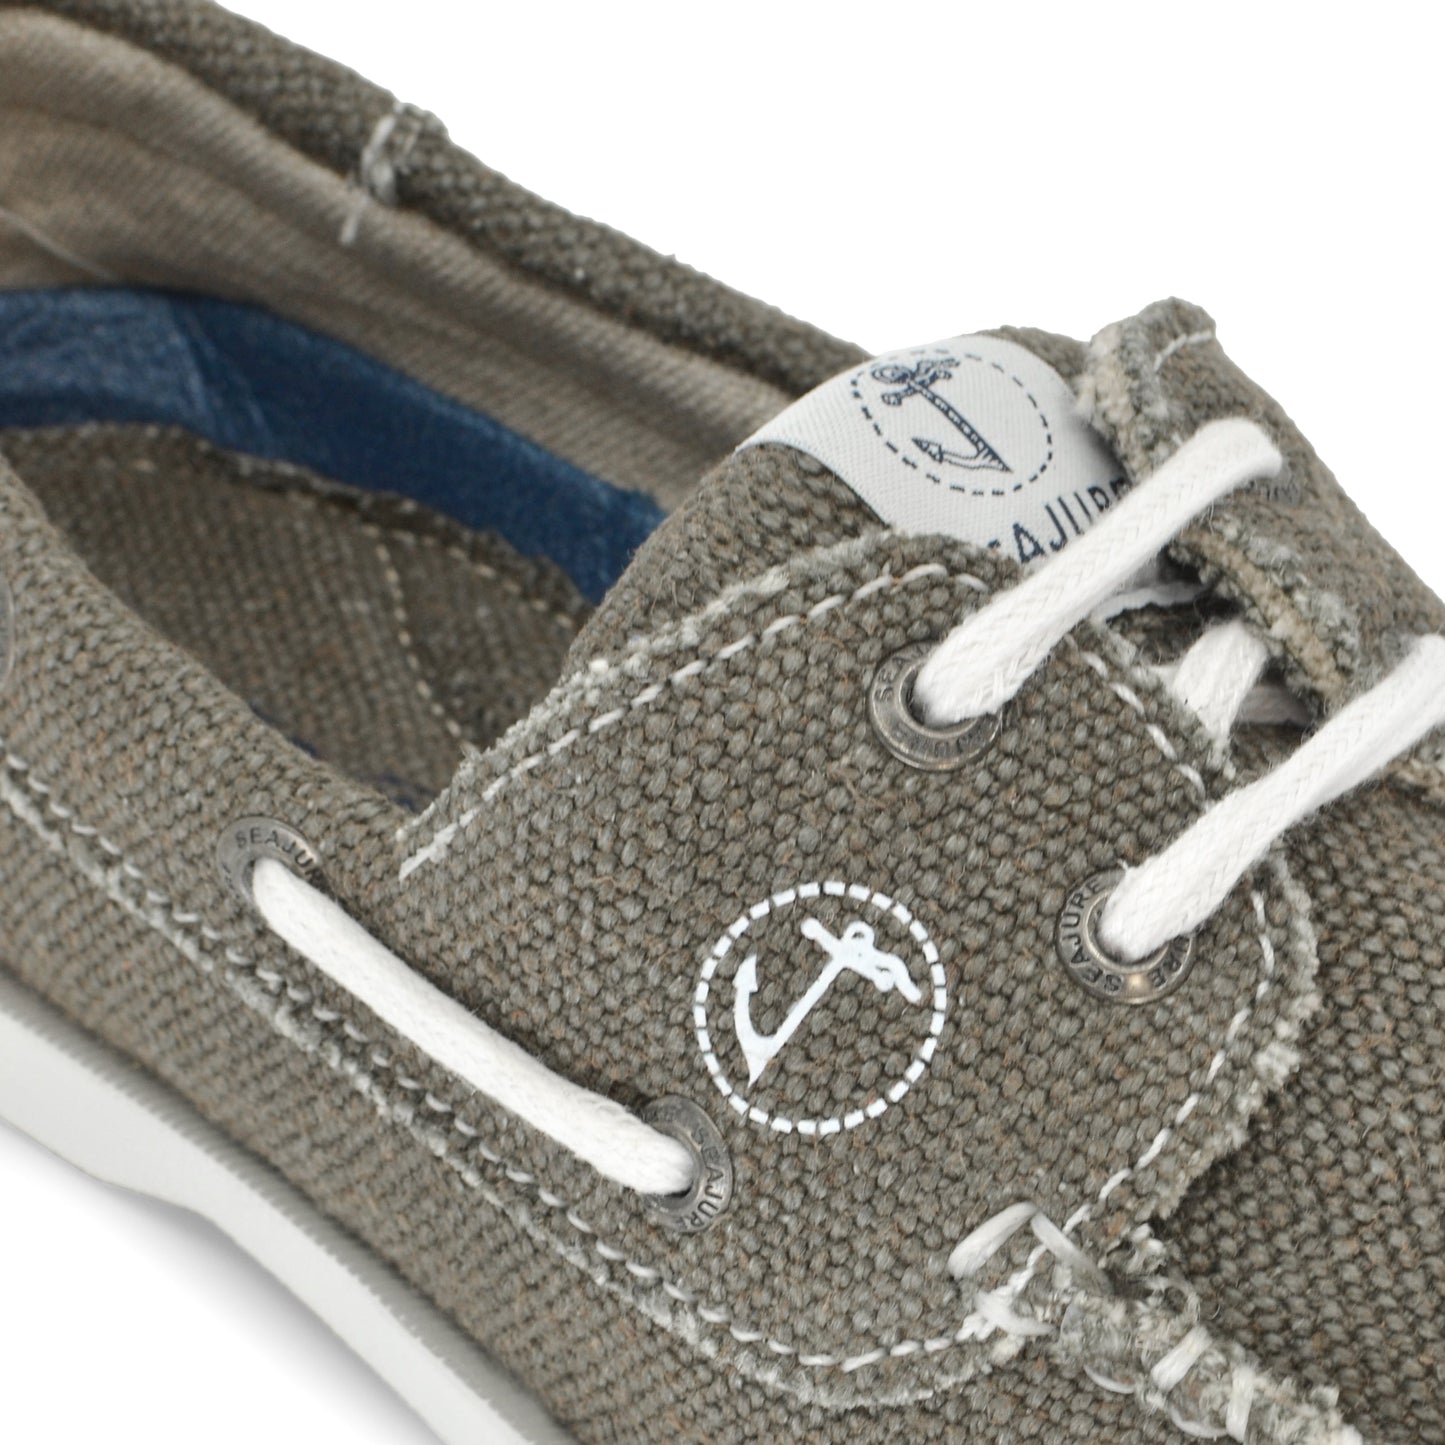 Close-up of a grey Amethyst Hestia Men Hemp & Vegan Boat Shoe Scopello with white laces and an anchor logo on the side. The shoe, made from premium hemp, displays visible stitching and a small tag near the laces.